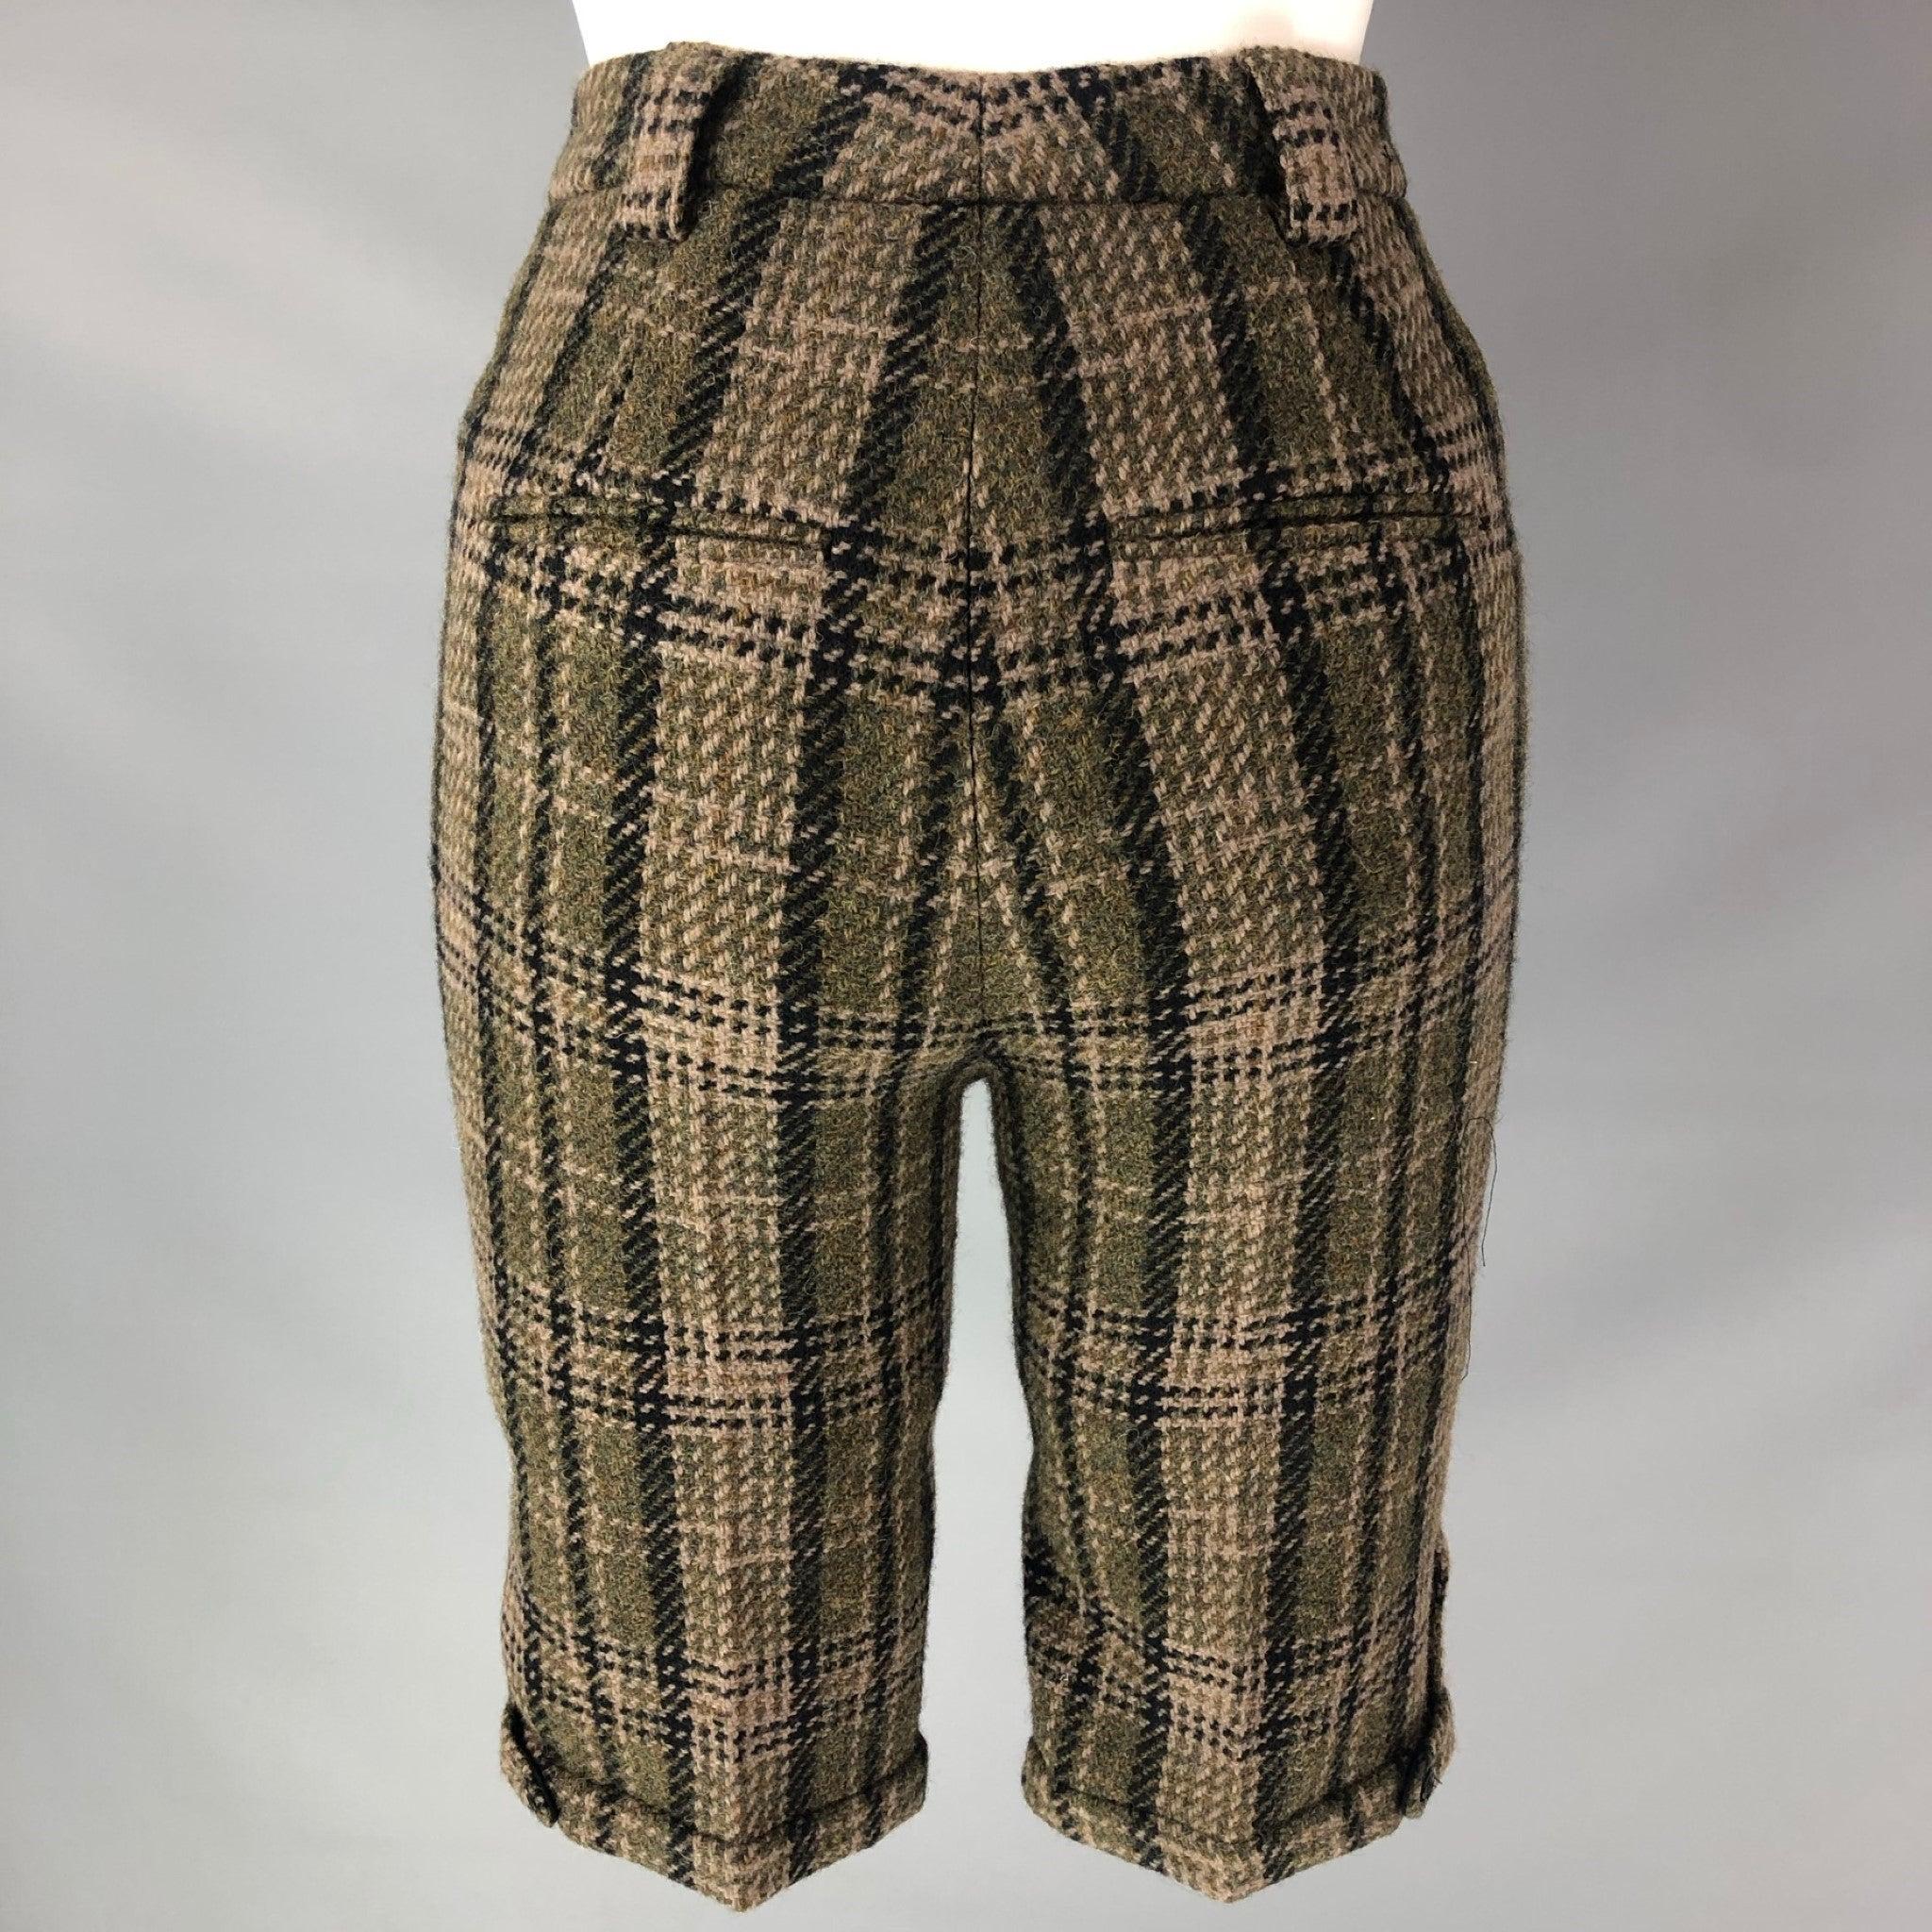 SAINT LAURENT Straight dress casual pants comes in a olive plaid wool, lined featuring Flat Front, two wear faux pockets without button Zip and hook and bar closure. Made in Italy. Very Good Pre-Owned Condition.  
 

 Marked:  no size tags 
 

